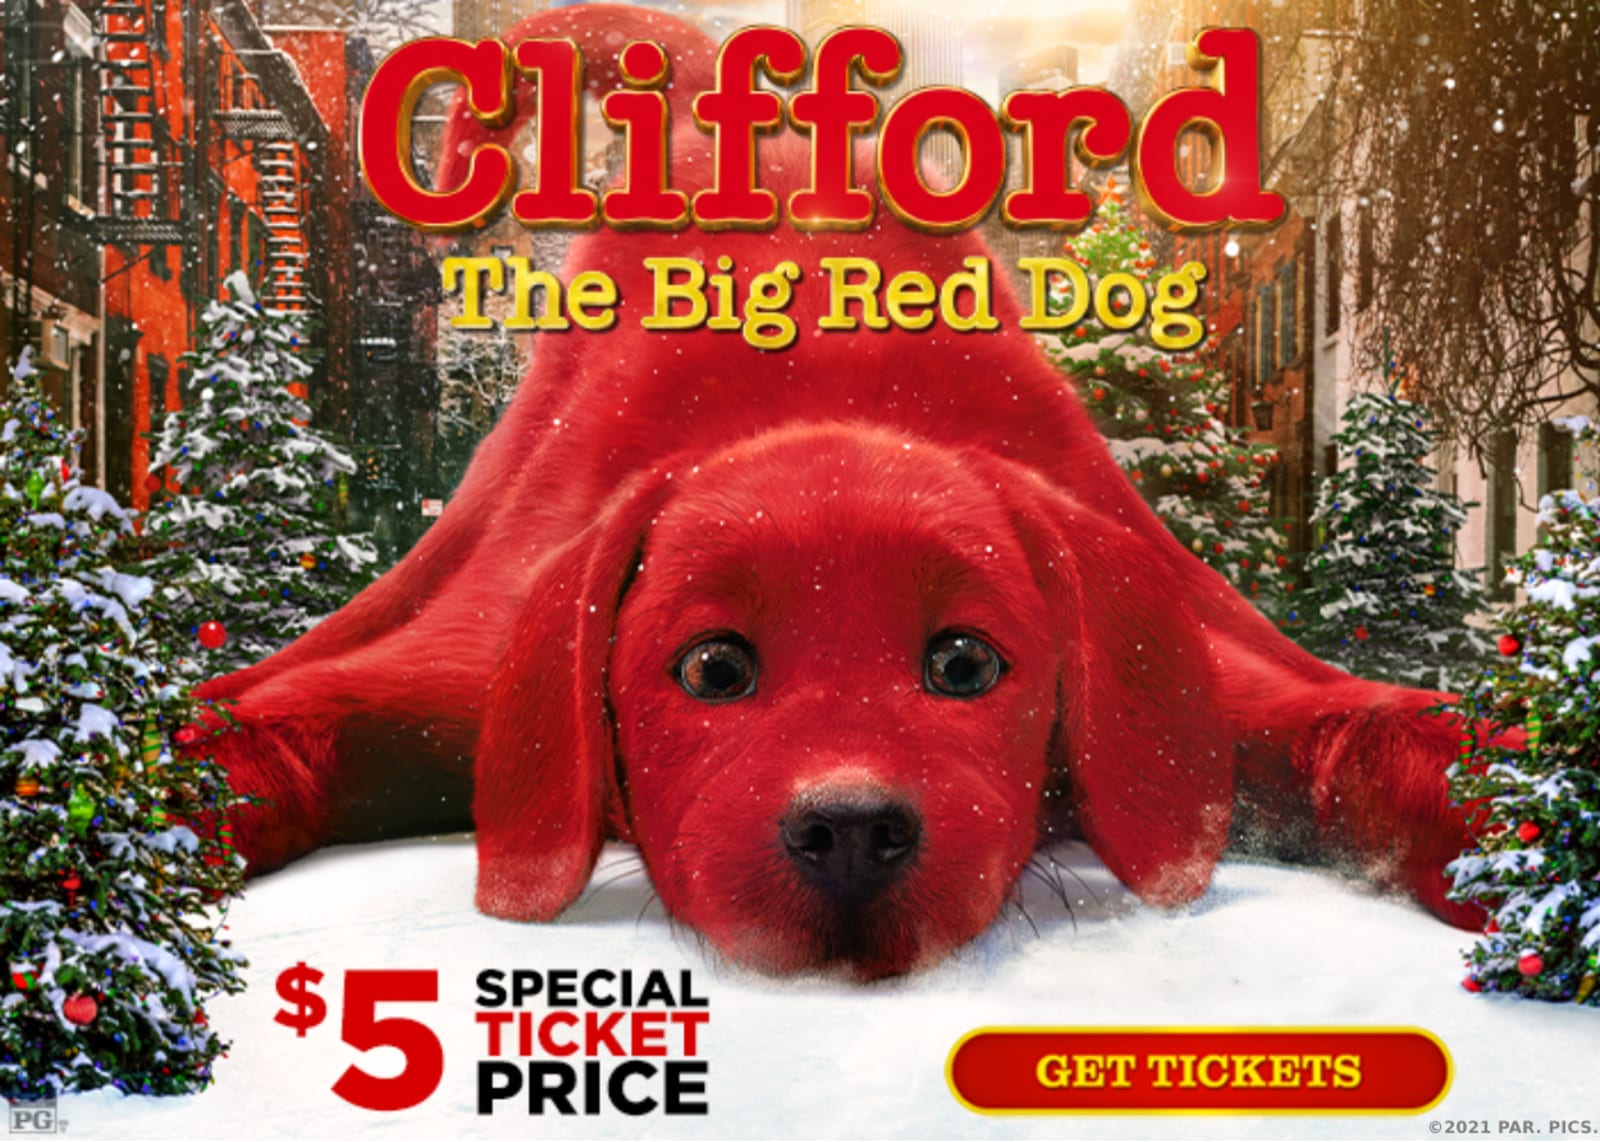 Clifford The Big Red Dog Movie Tickets for $5